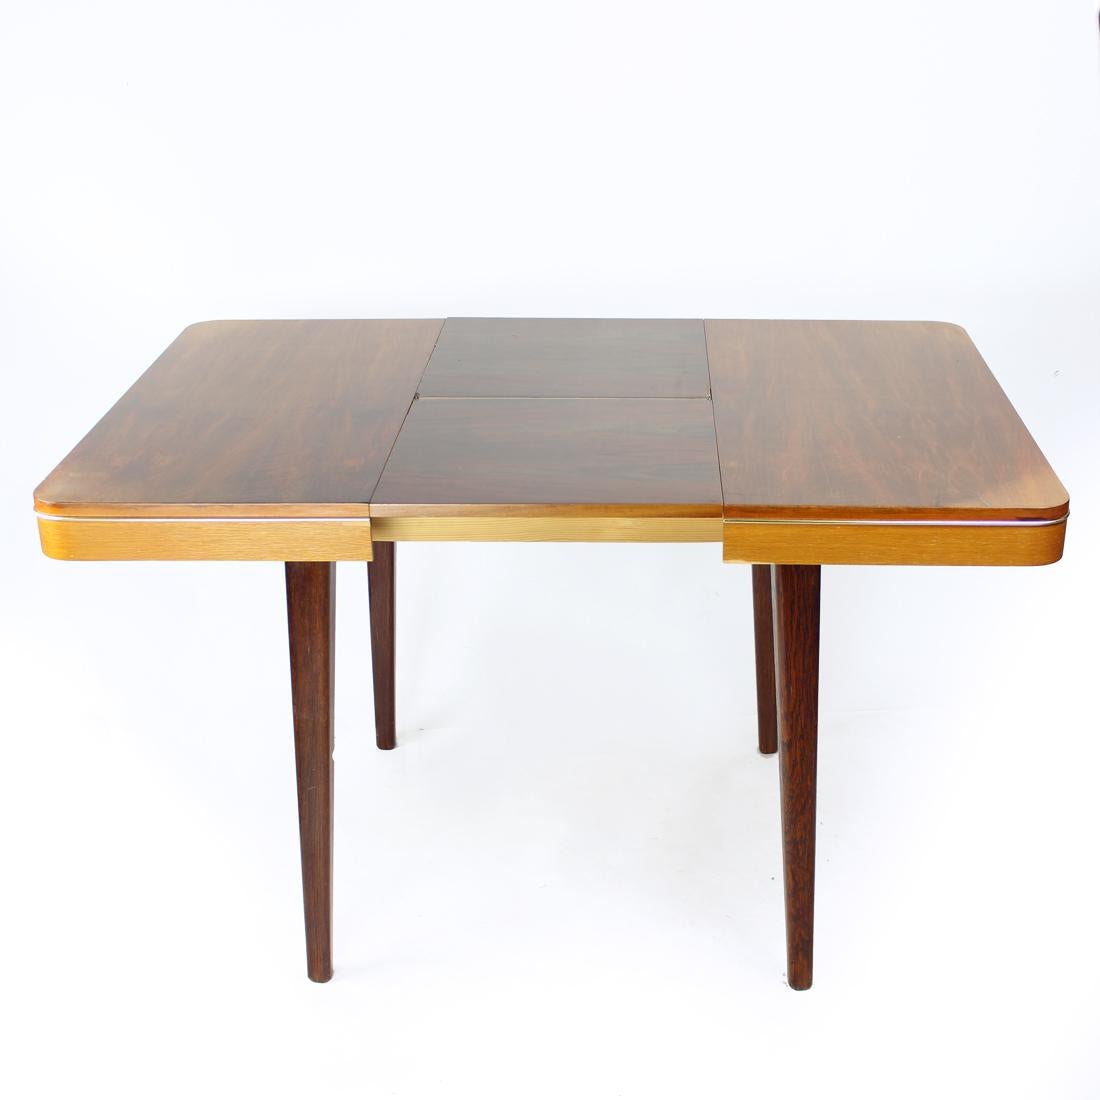 Beautiful dining table produced in 1968, original label still attached. It even says the table is made of oak and walnut wood. the top board is in walnut wood with beautiful veneer on top. The table is easily extendable, just pull the two halfs